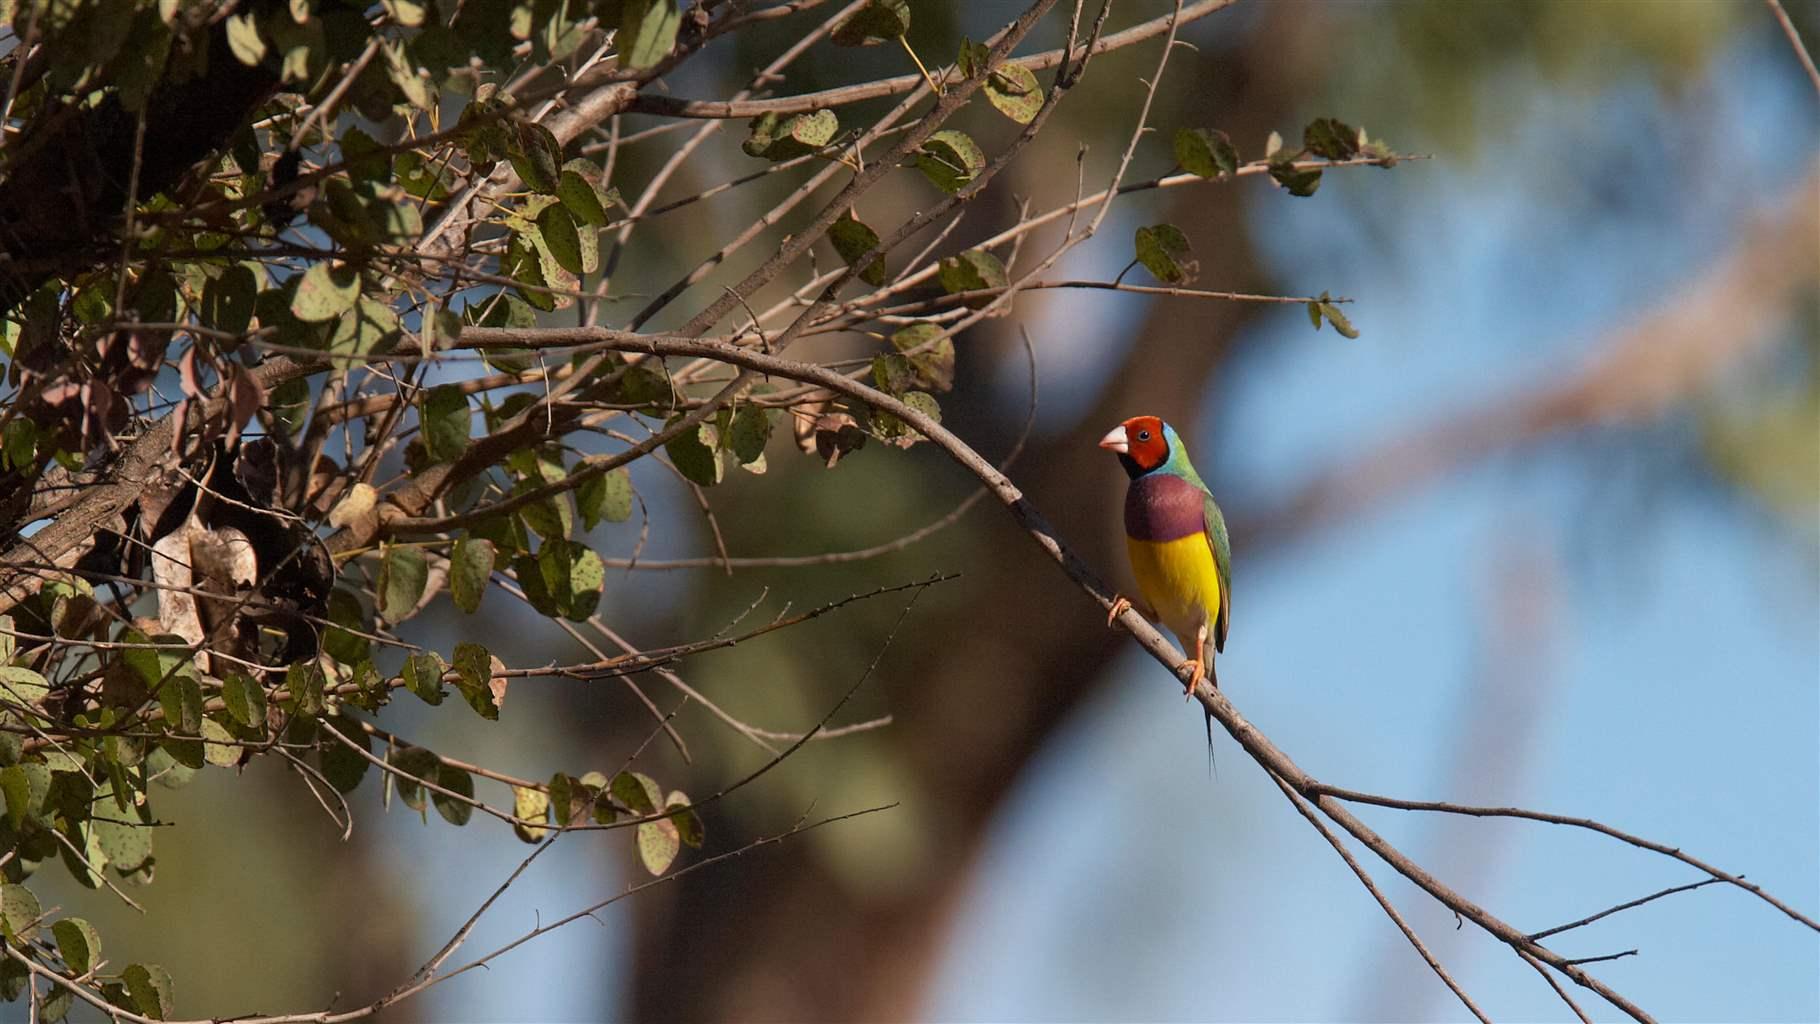 A male Gouldian finch perches on a branch. Its vibrant plumage is a striking combination of distinct patches of colour including red, purple, yellow, blue, and green.